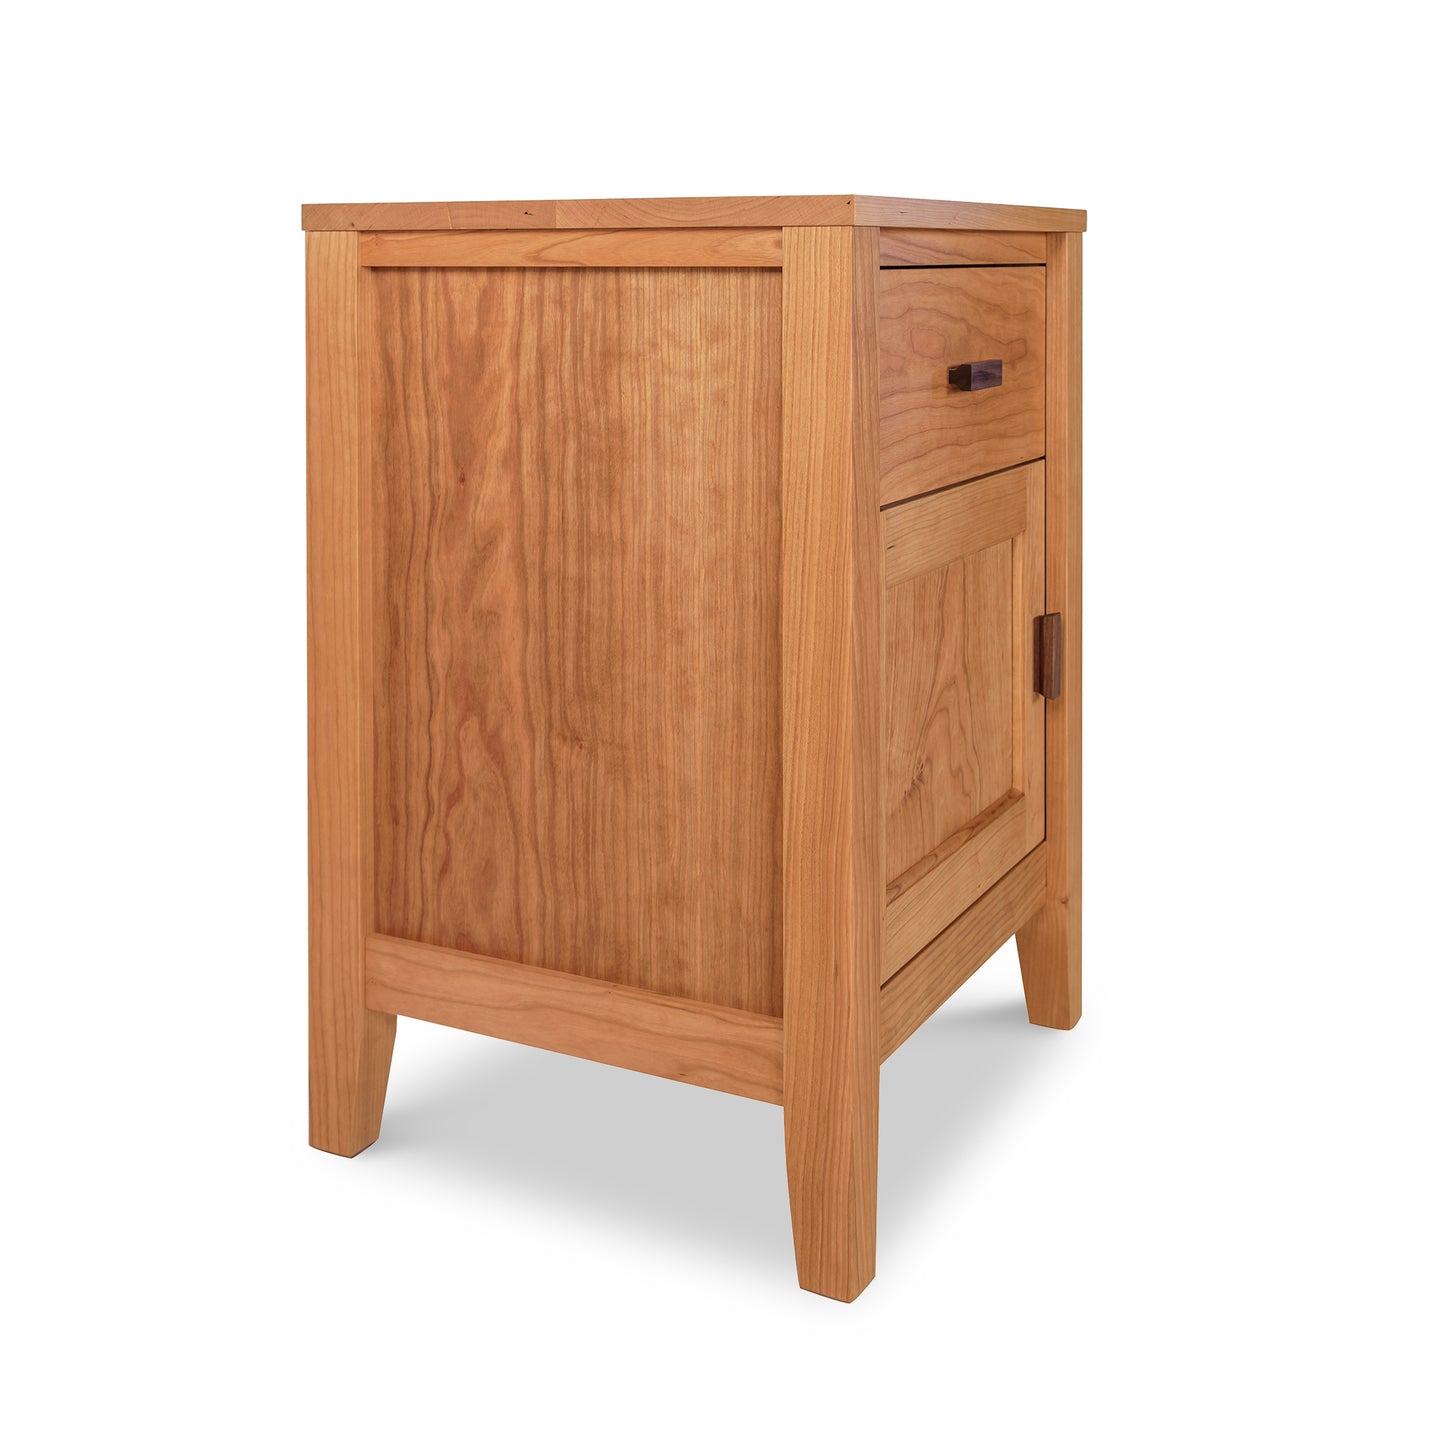 An Andover Modern 1-Drawer Nightstand with Door crafted by Maple Corner Woodworks, featuring a single door and an upper drawer made from sustainable hardwoods. It stands on angled legs, employs a light brown hue, and showcases